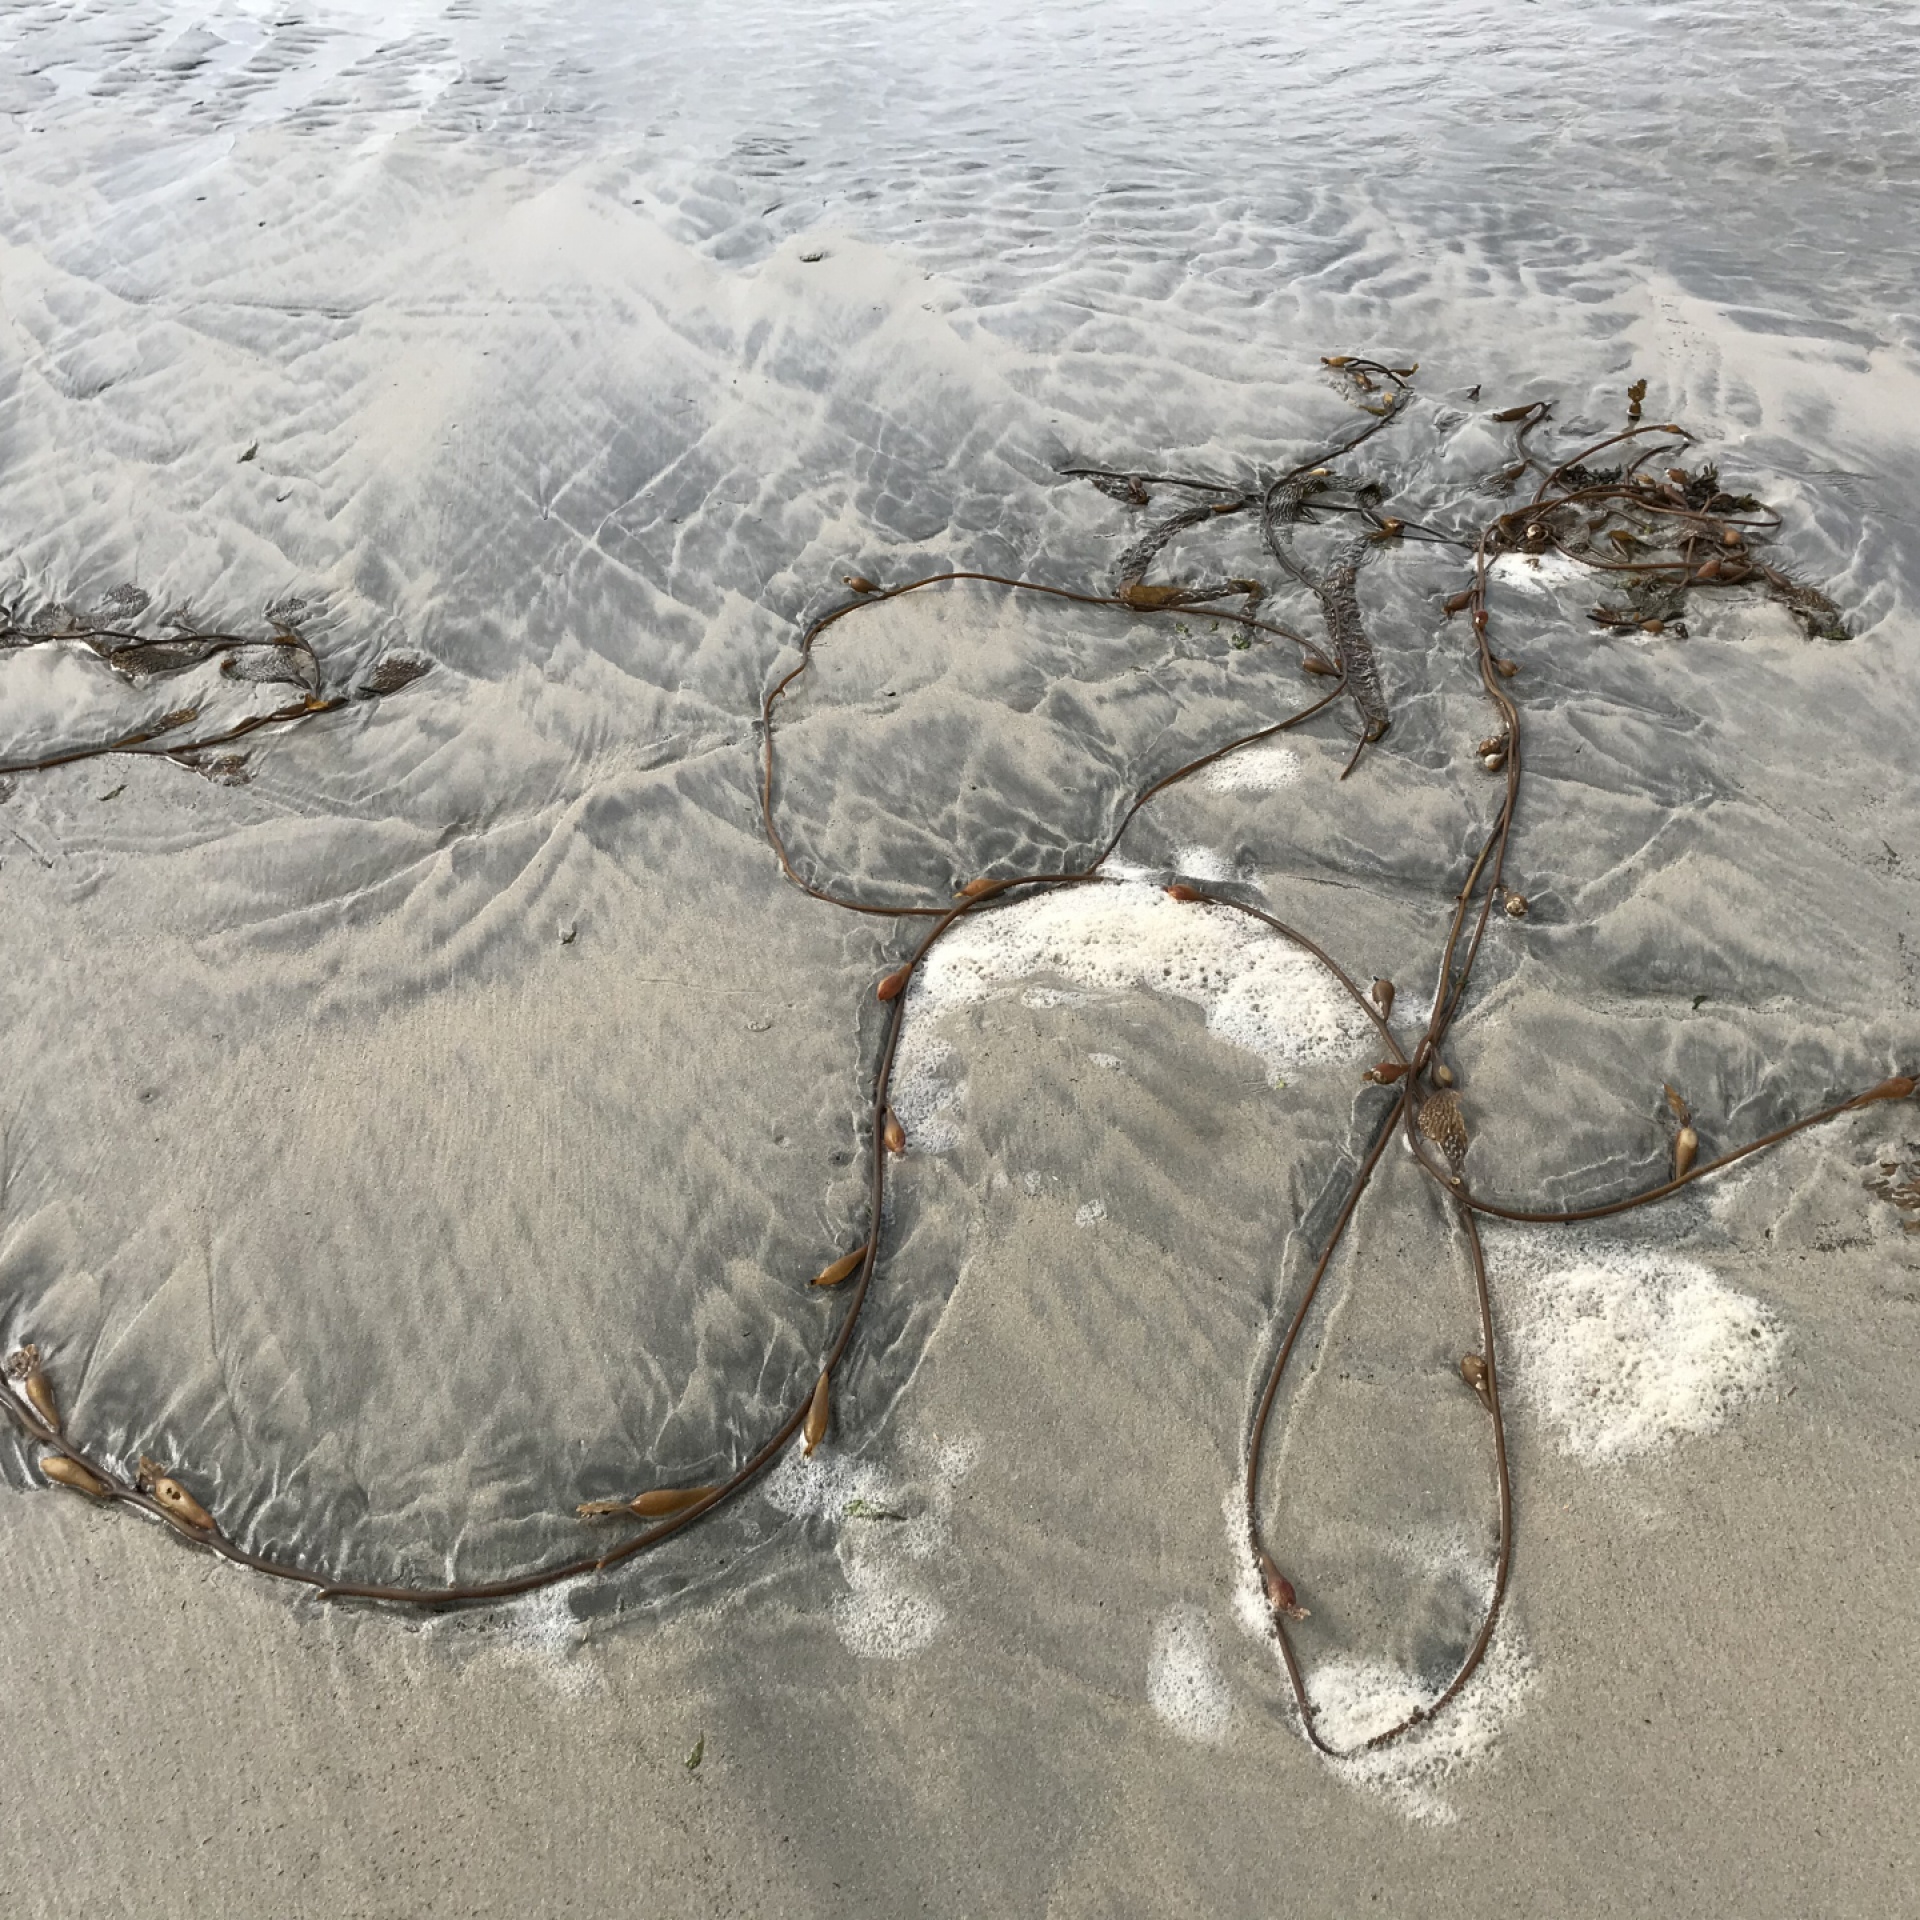 An image of rope washing ashore on a beach.